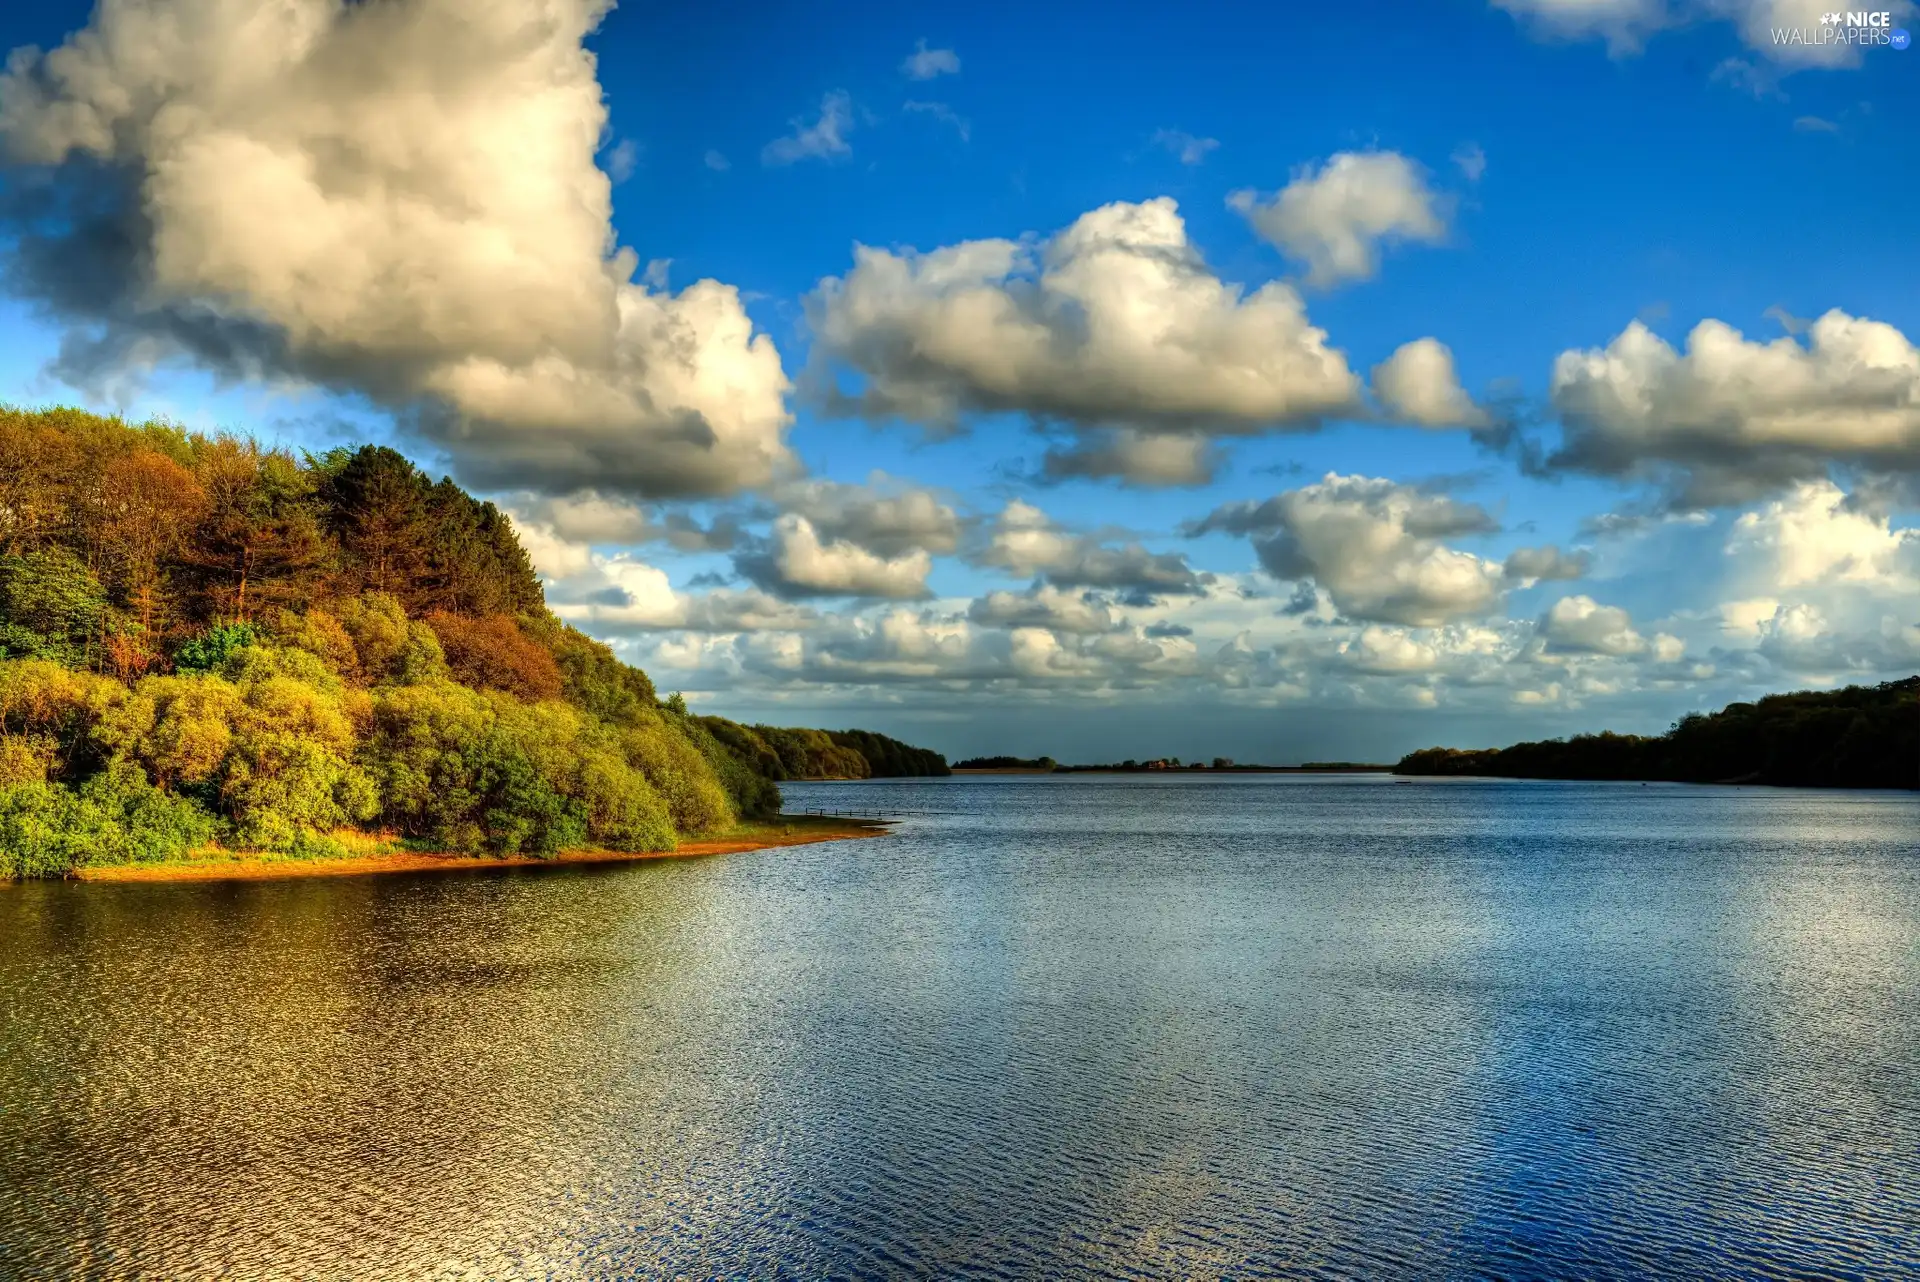 Sky, clouds, trees, viewes, River